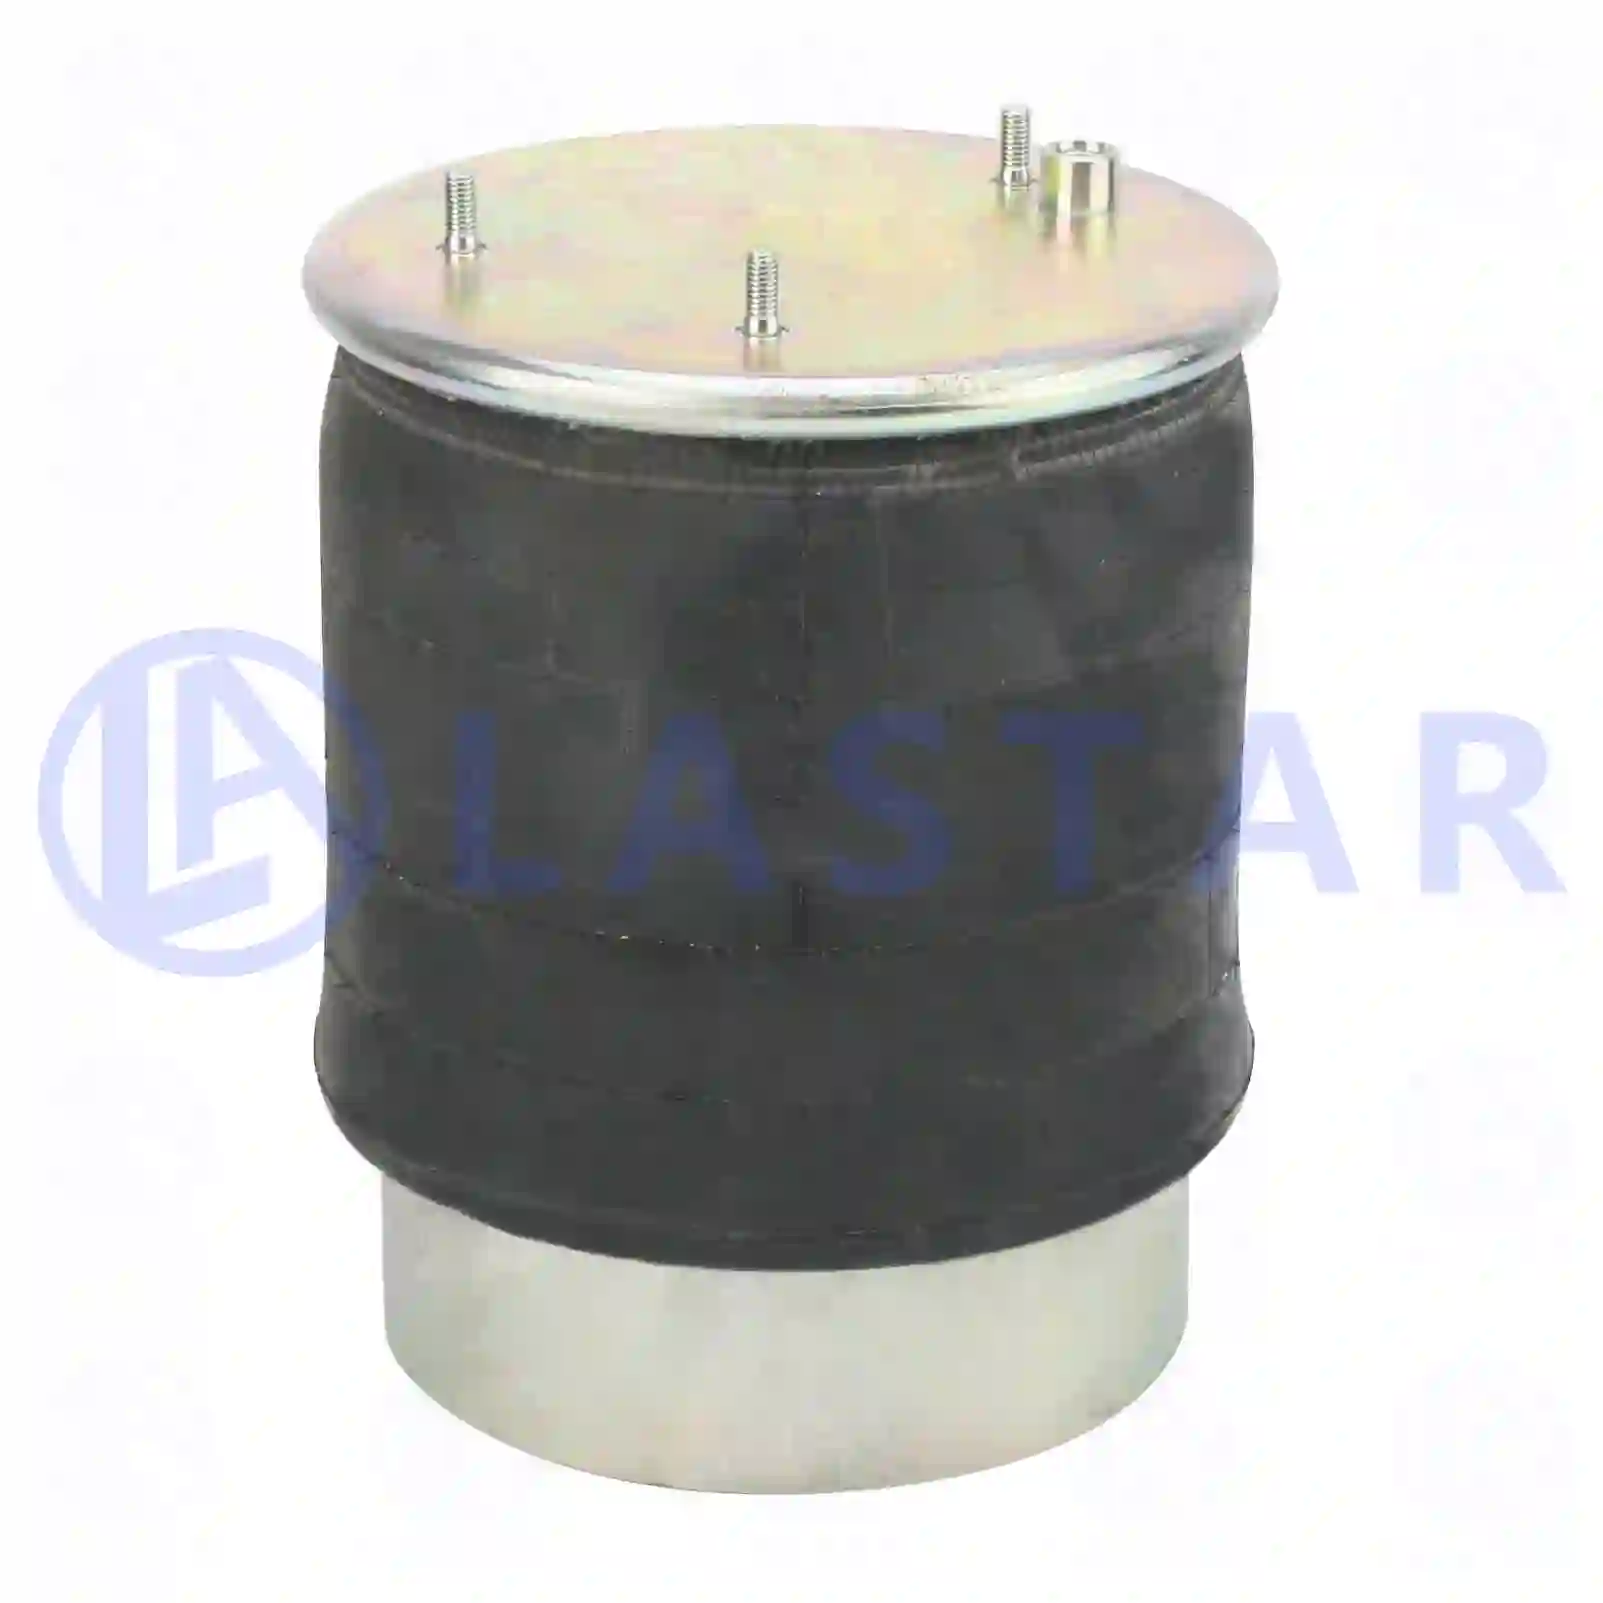 Air spring, with steel piston, 77727214, 0526651, 1154759, 526651, MLF7054 ||  77727214 Lastar Spare Part | Truck Spare Parts, Auotomotive Spare Parts Air spring, with steel piston, 77727214, 0526651, 1154759, 526651, MLF7054 ||  77727214 Lastar Spare Part | Truck Spare Parts, Auotomotive Spare Parts